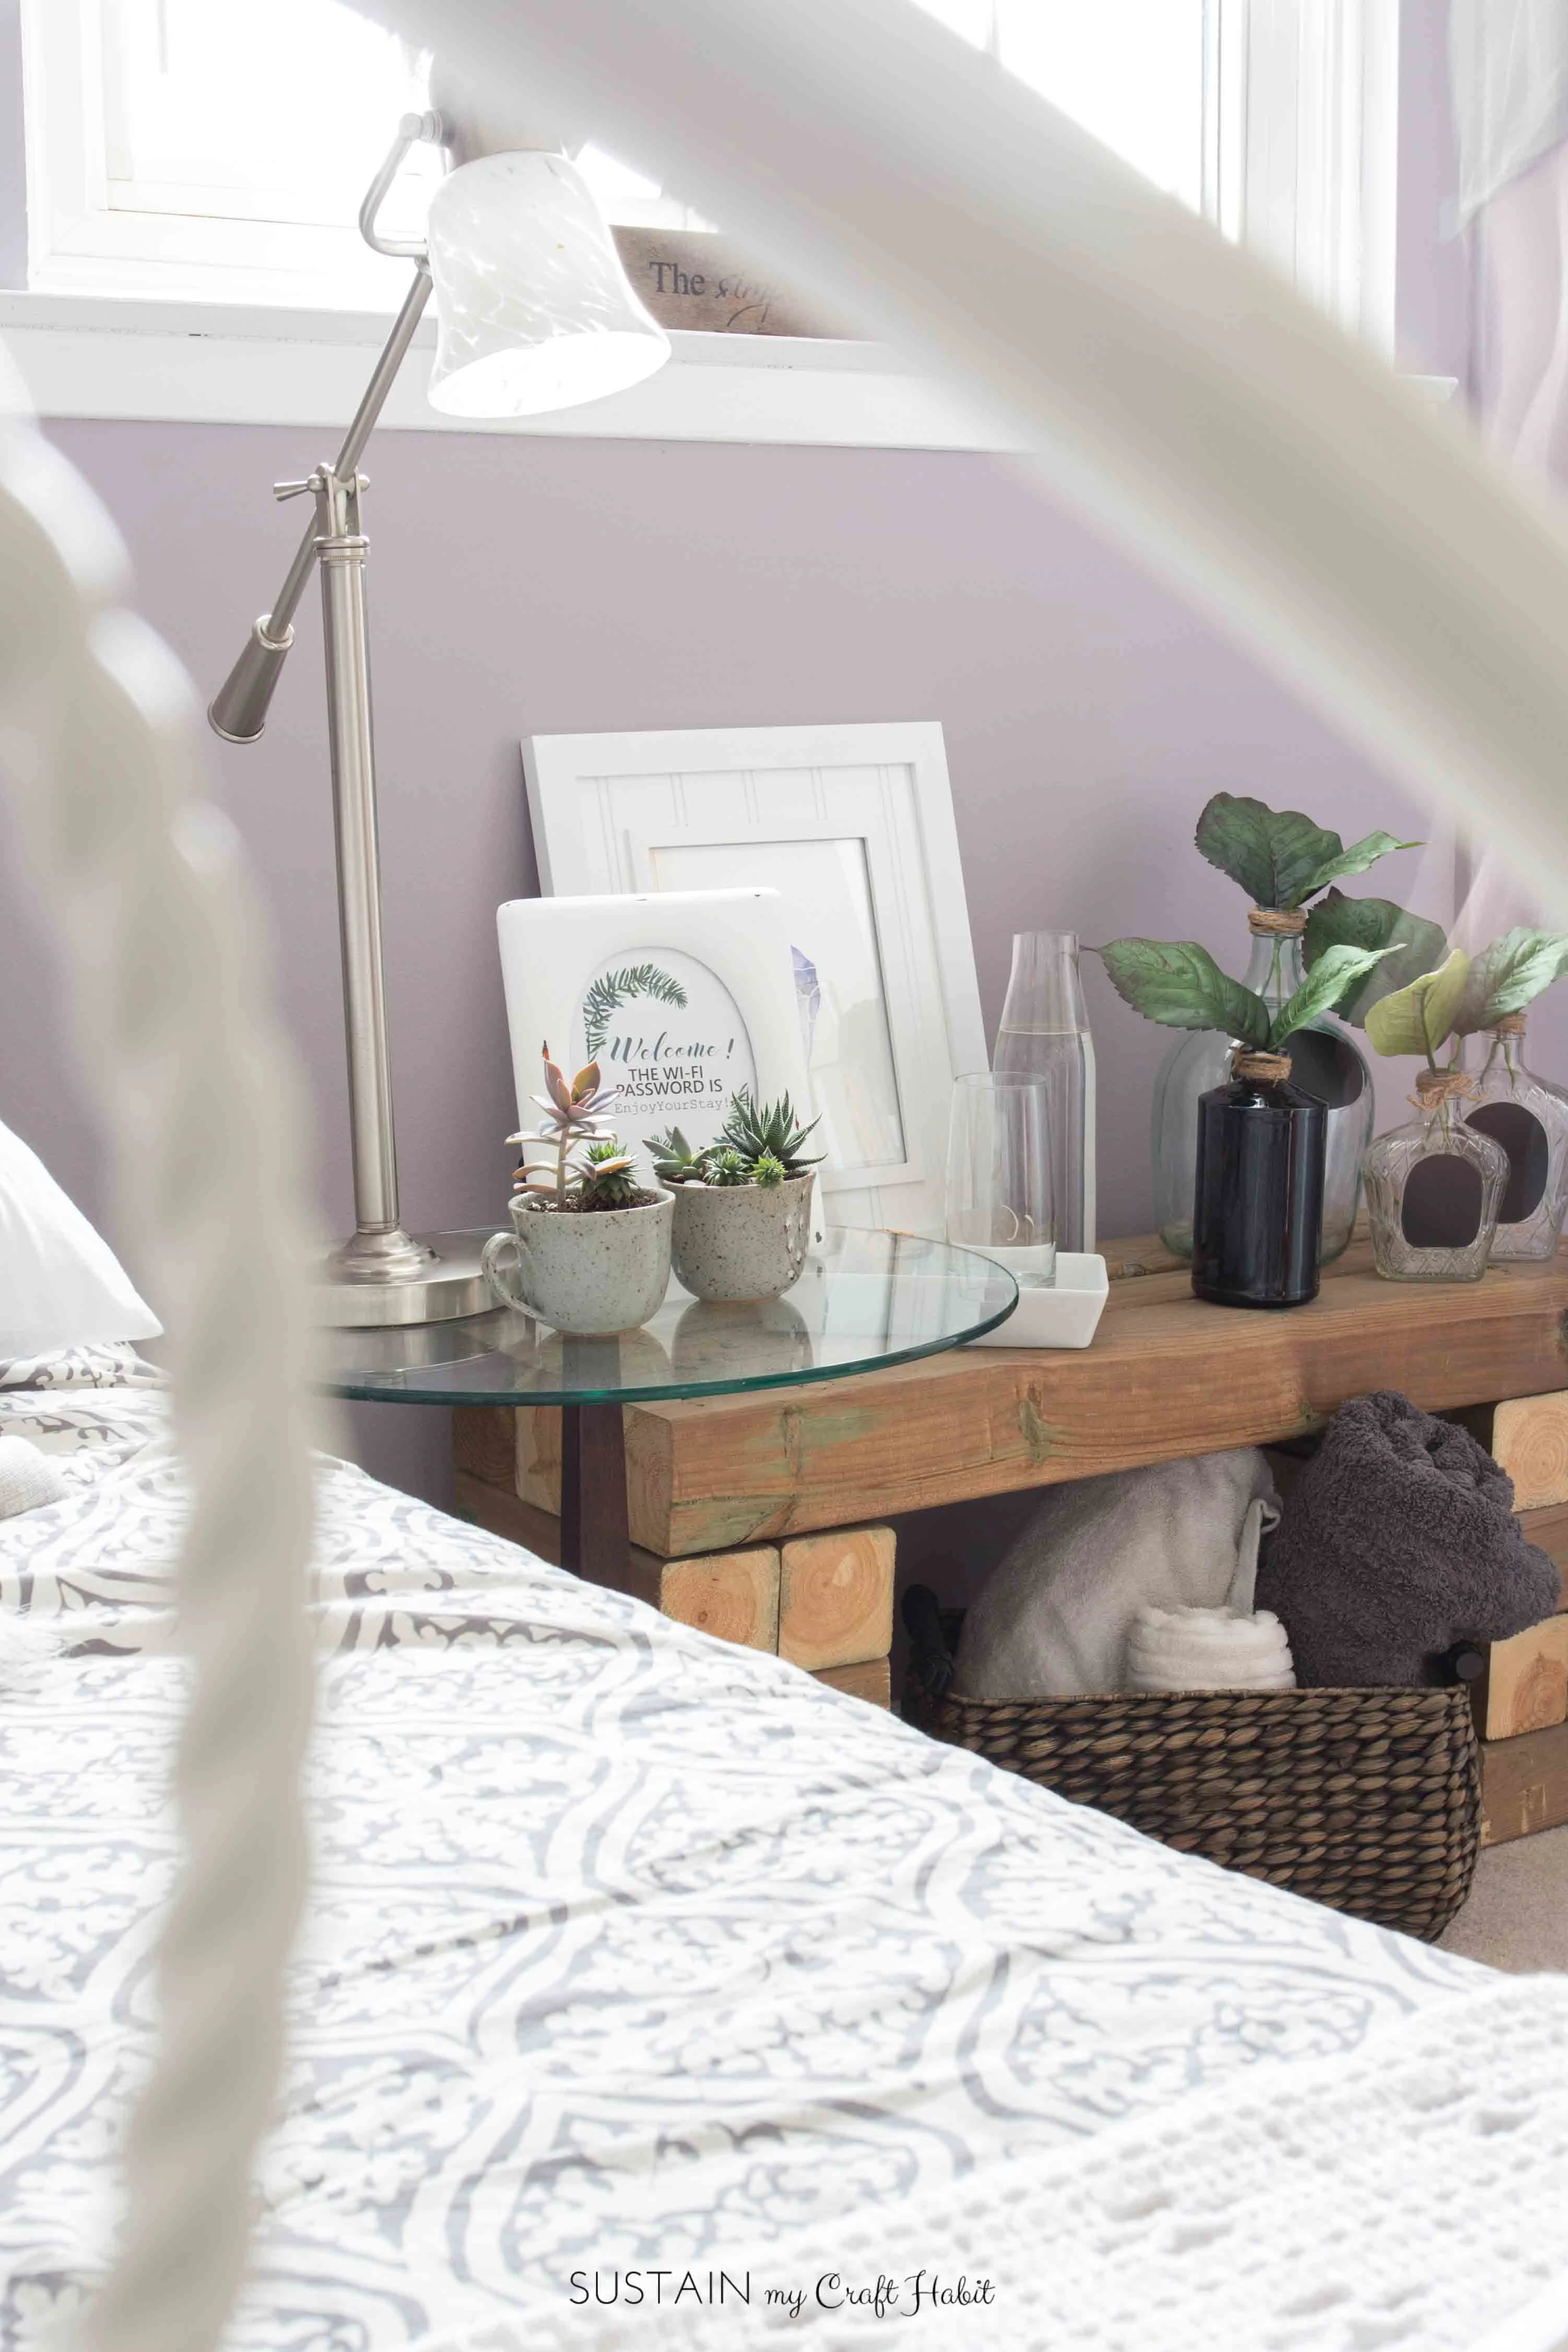 A decorative vignette of photo grames, plants and glass bottles on a wood bench in a guest bedroom.